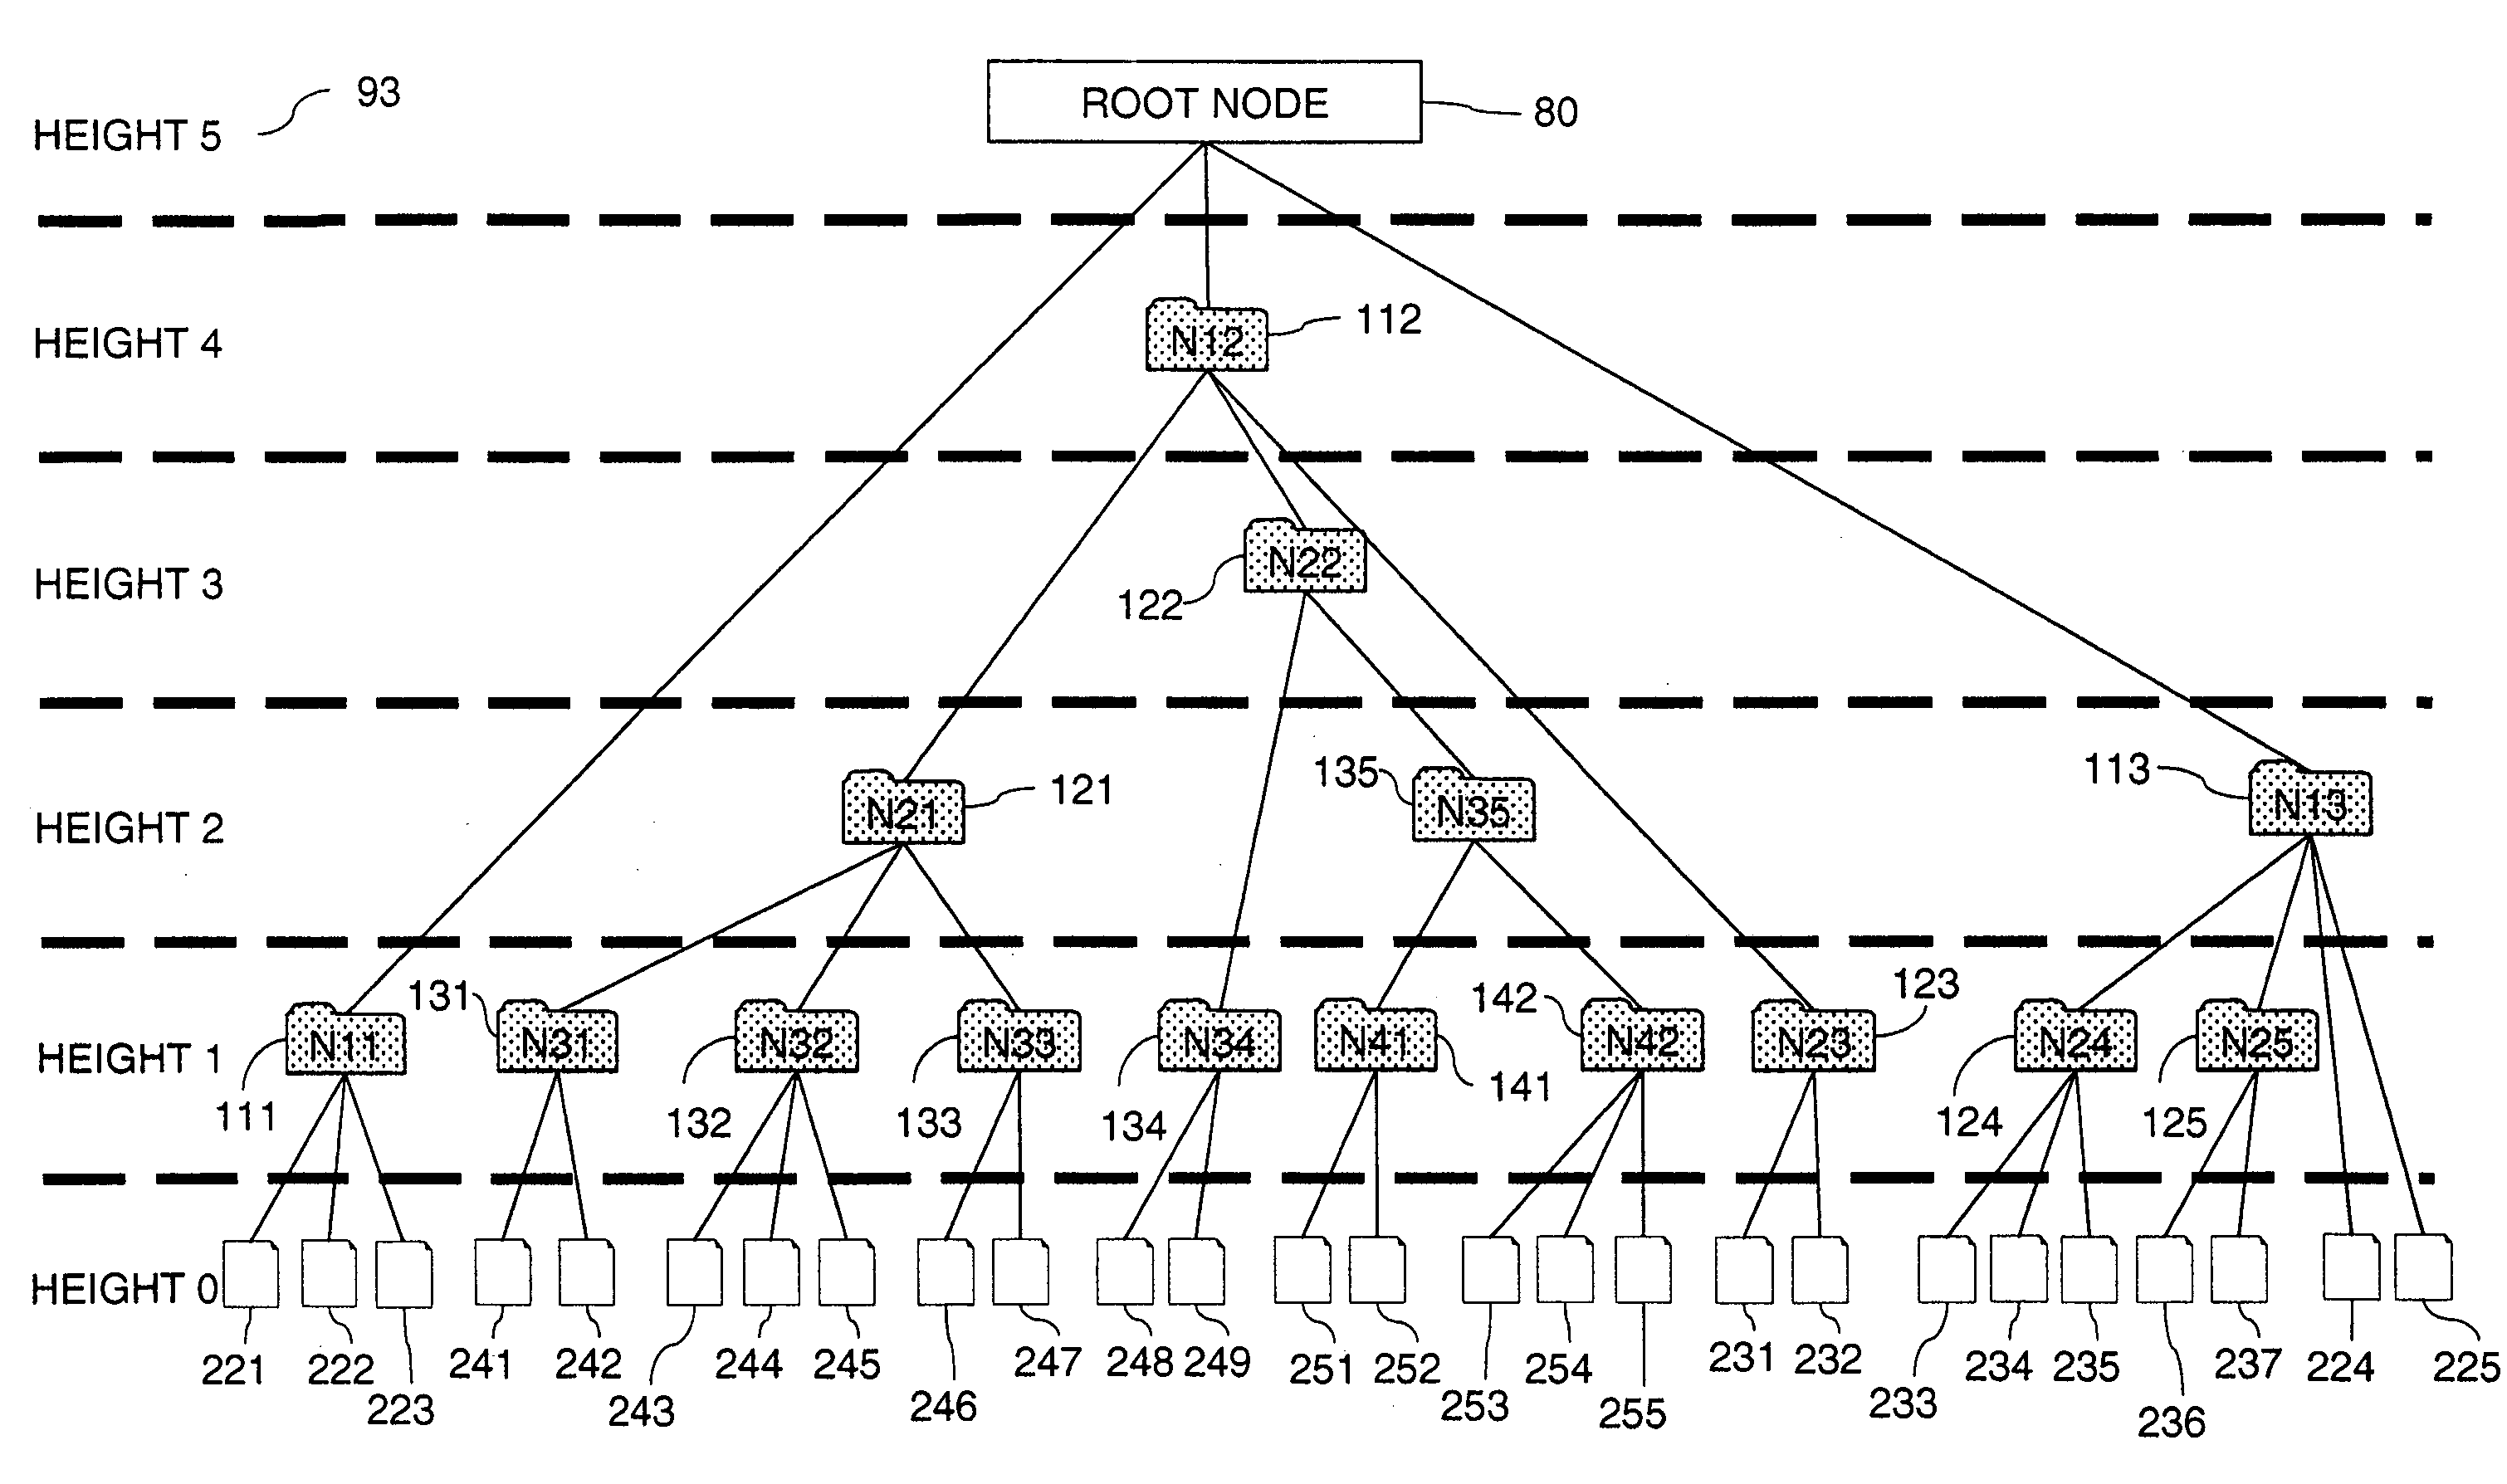 System and method for visually summarizing and interactively browsing hierarchically structured digital objects